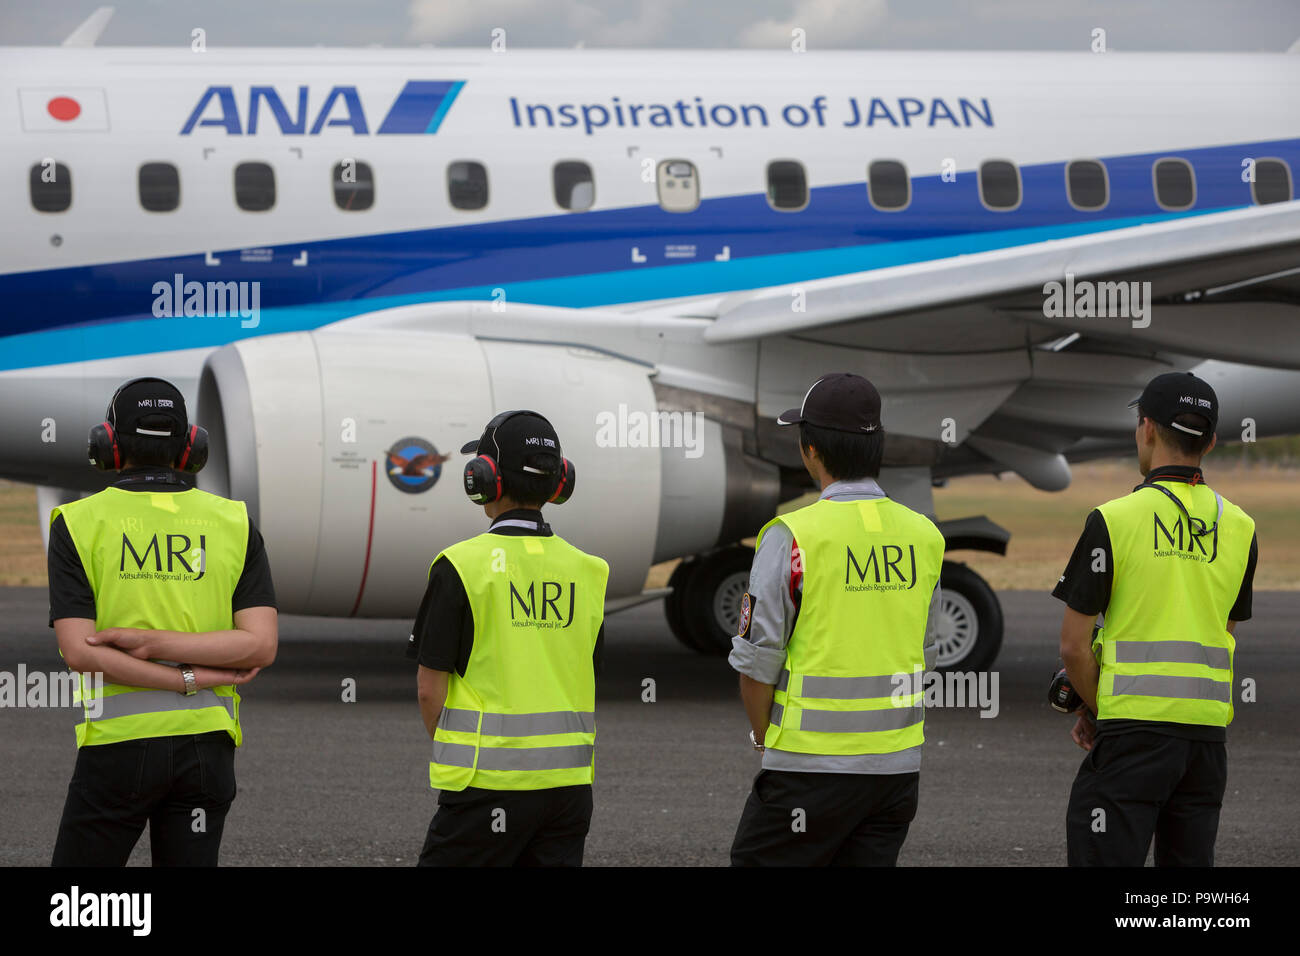 Ground crew with the Japanese airliner manufacturer, Mitsubishi wait for their MRJ (Mitsubishi Regional Jet) with the airline ANA to take off for its fliying demonstration at the Farnborough Airshow, on 18th July 2018, in Farnborough, England. Stock Photo